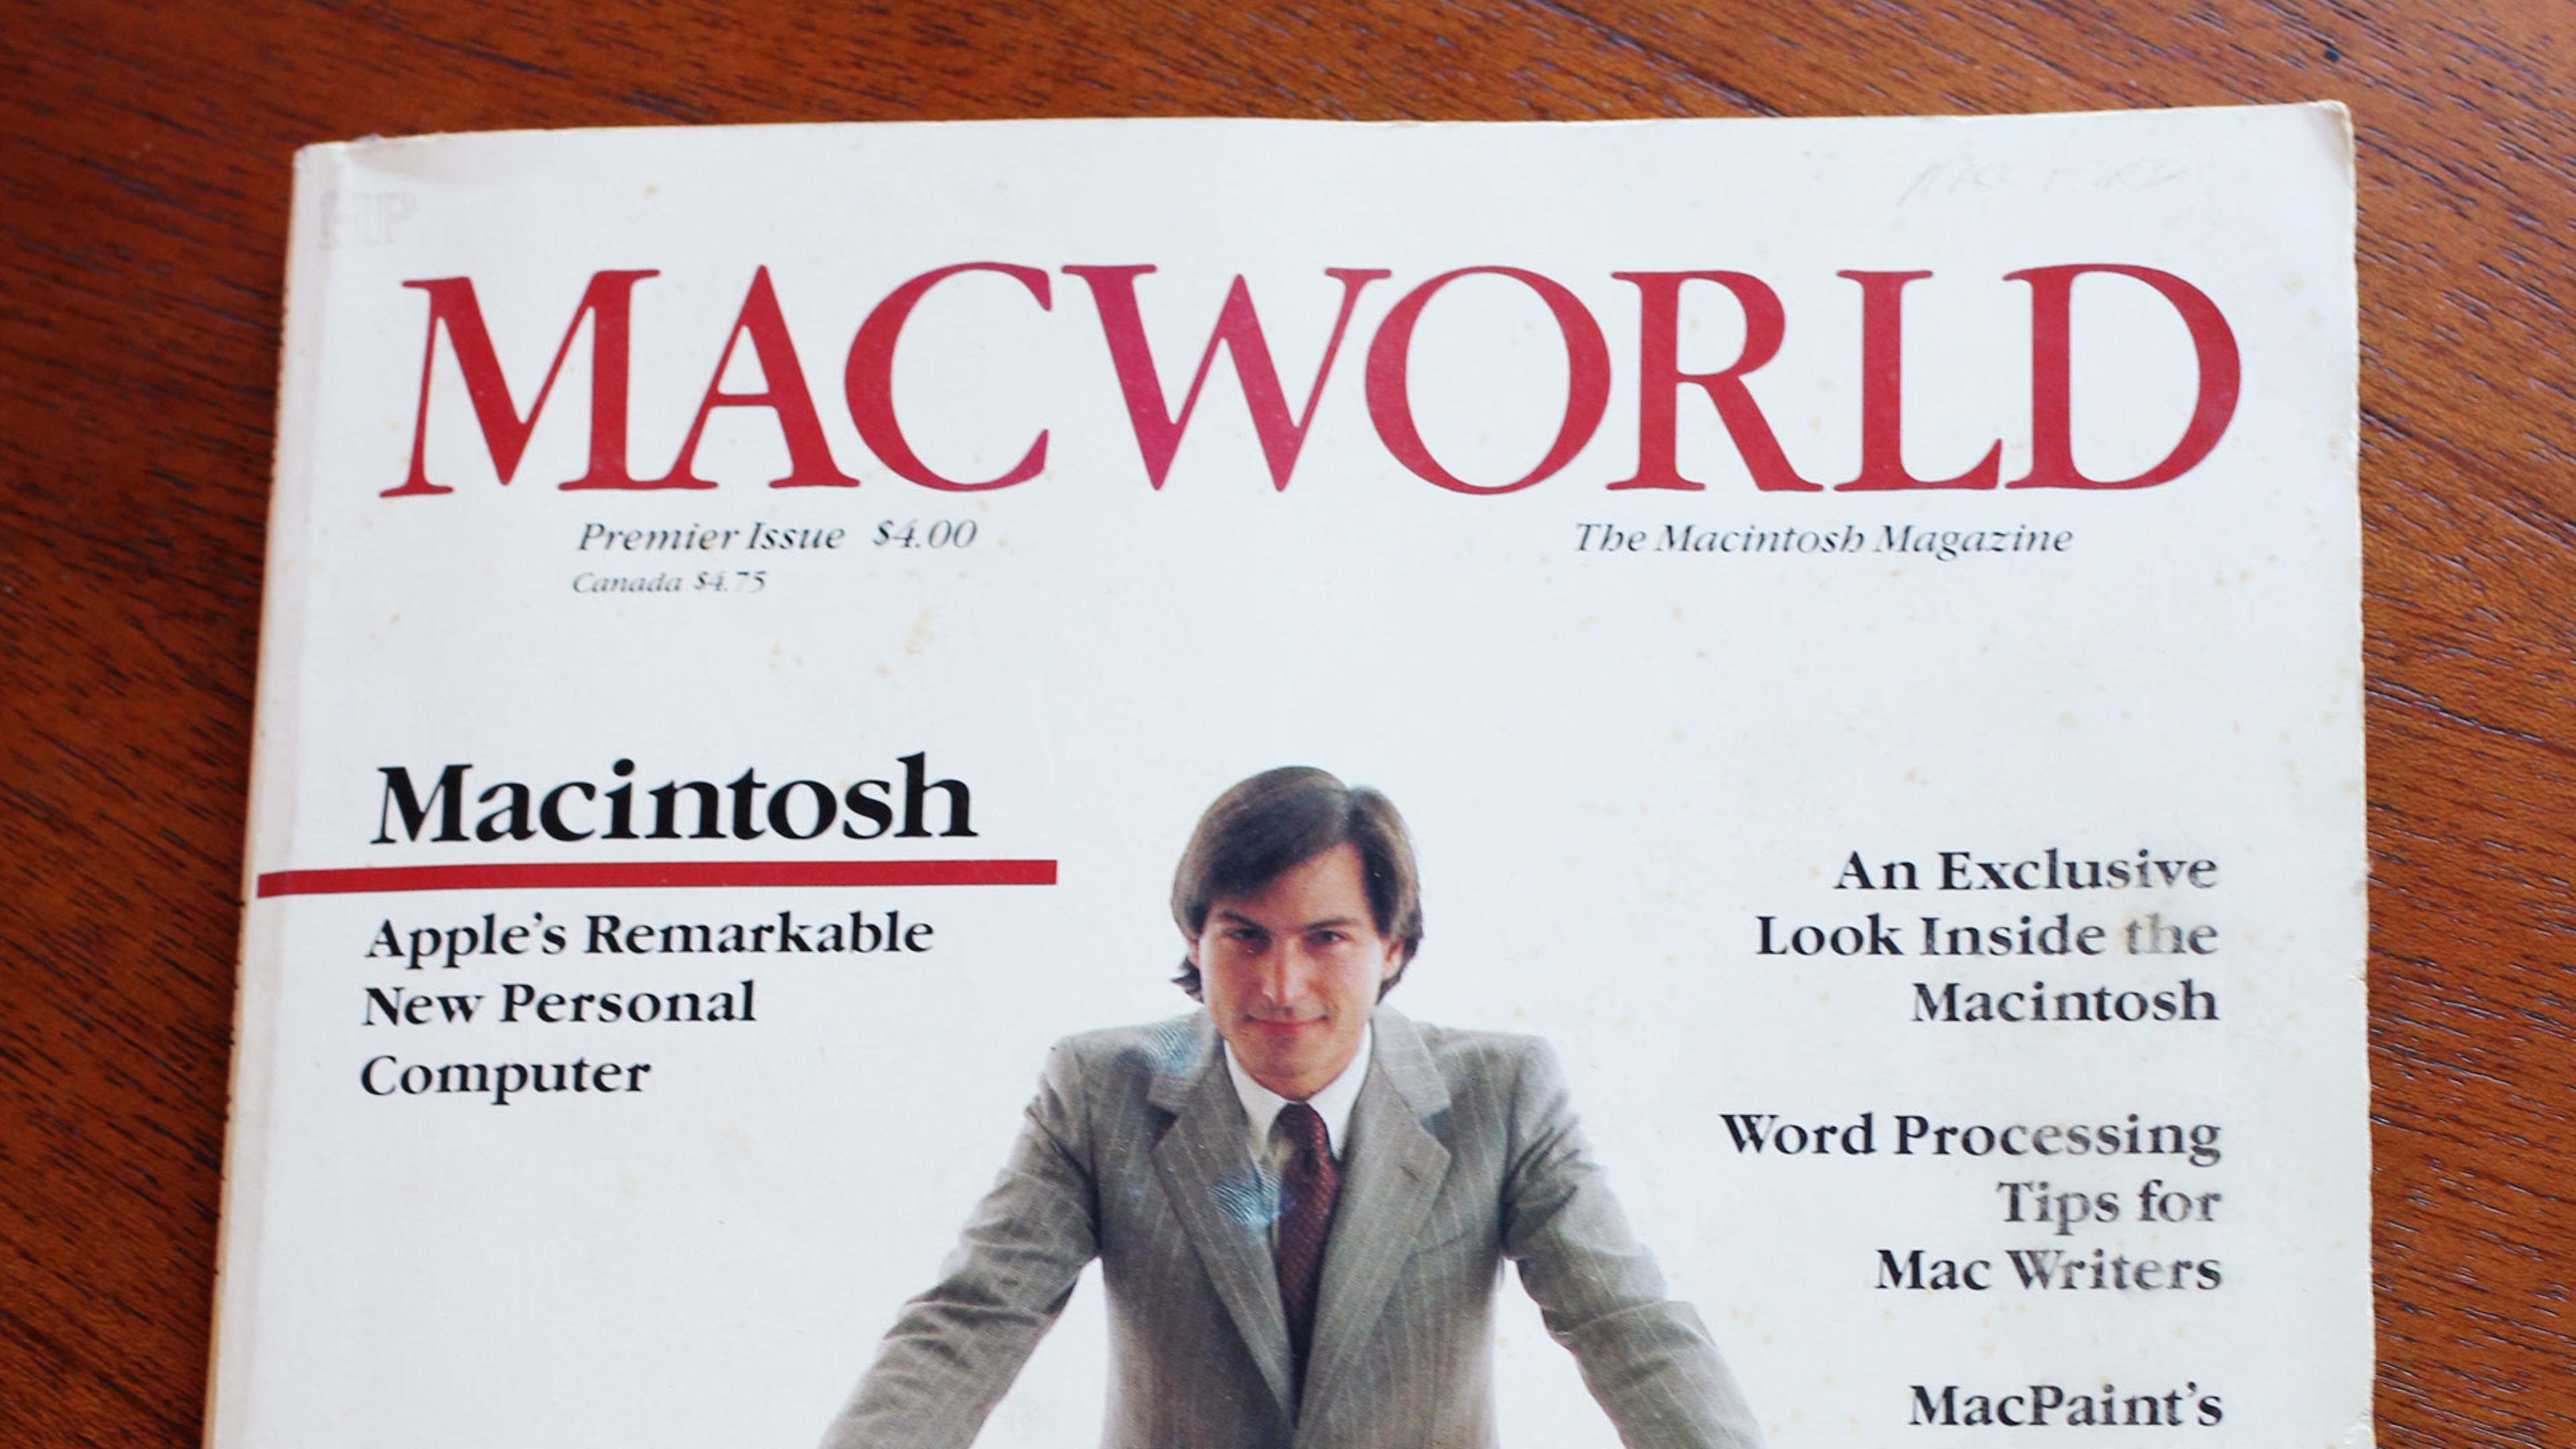 After 30 Years, Macworld Is No Longer A Magazine